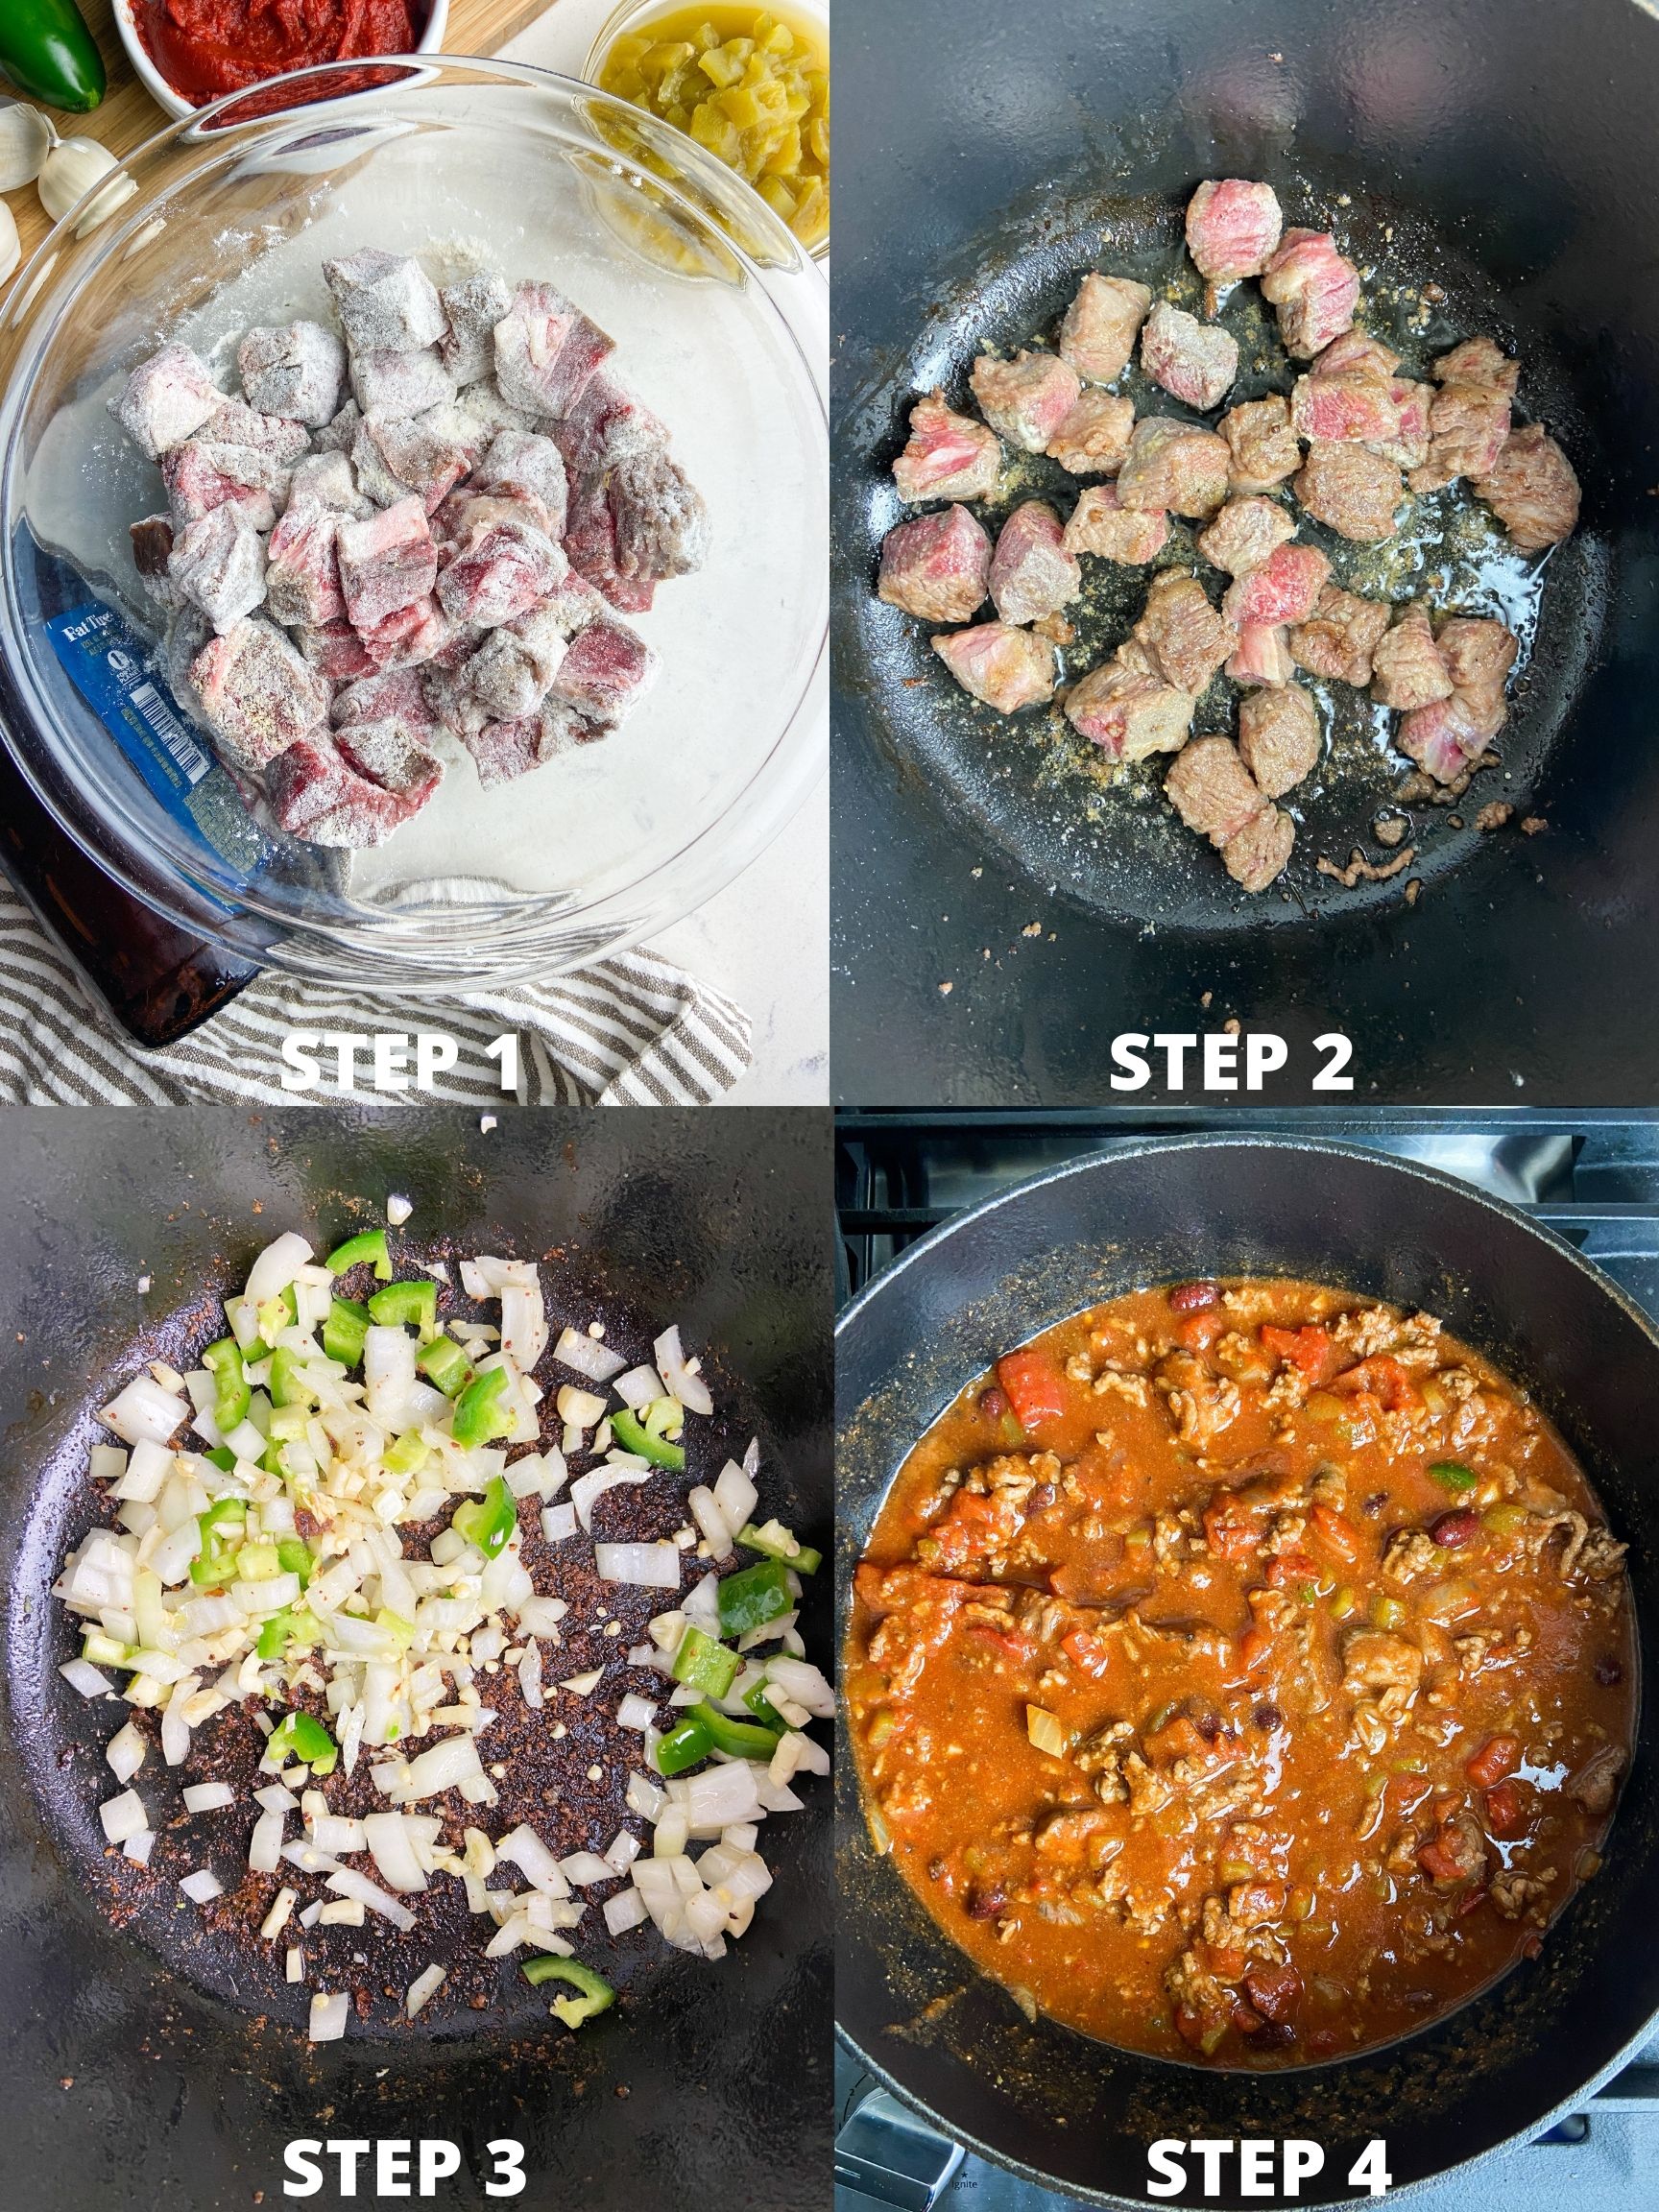 Step by step photos showing how to make beef chili